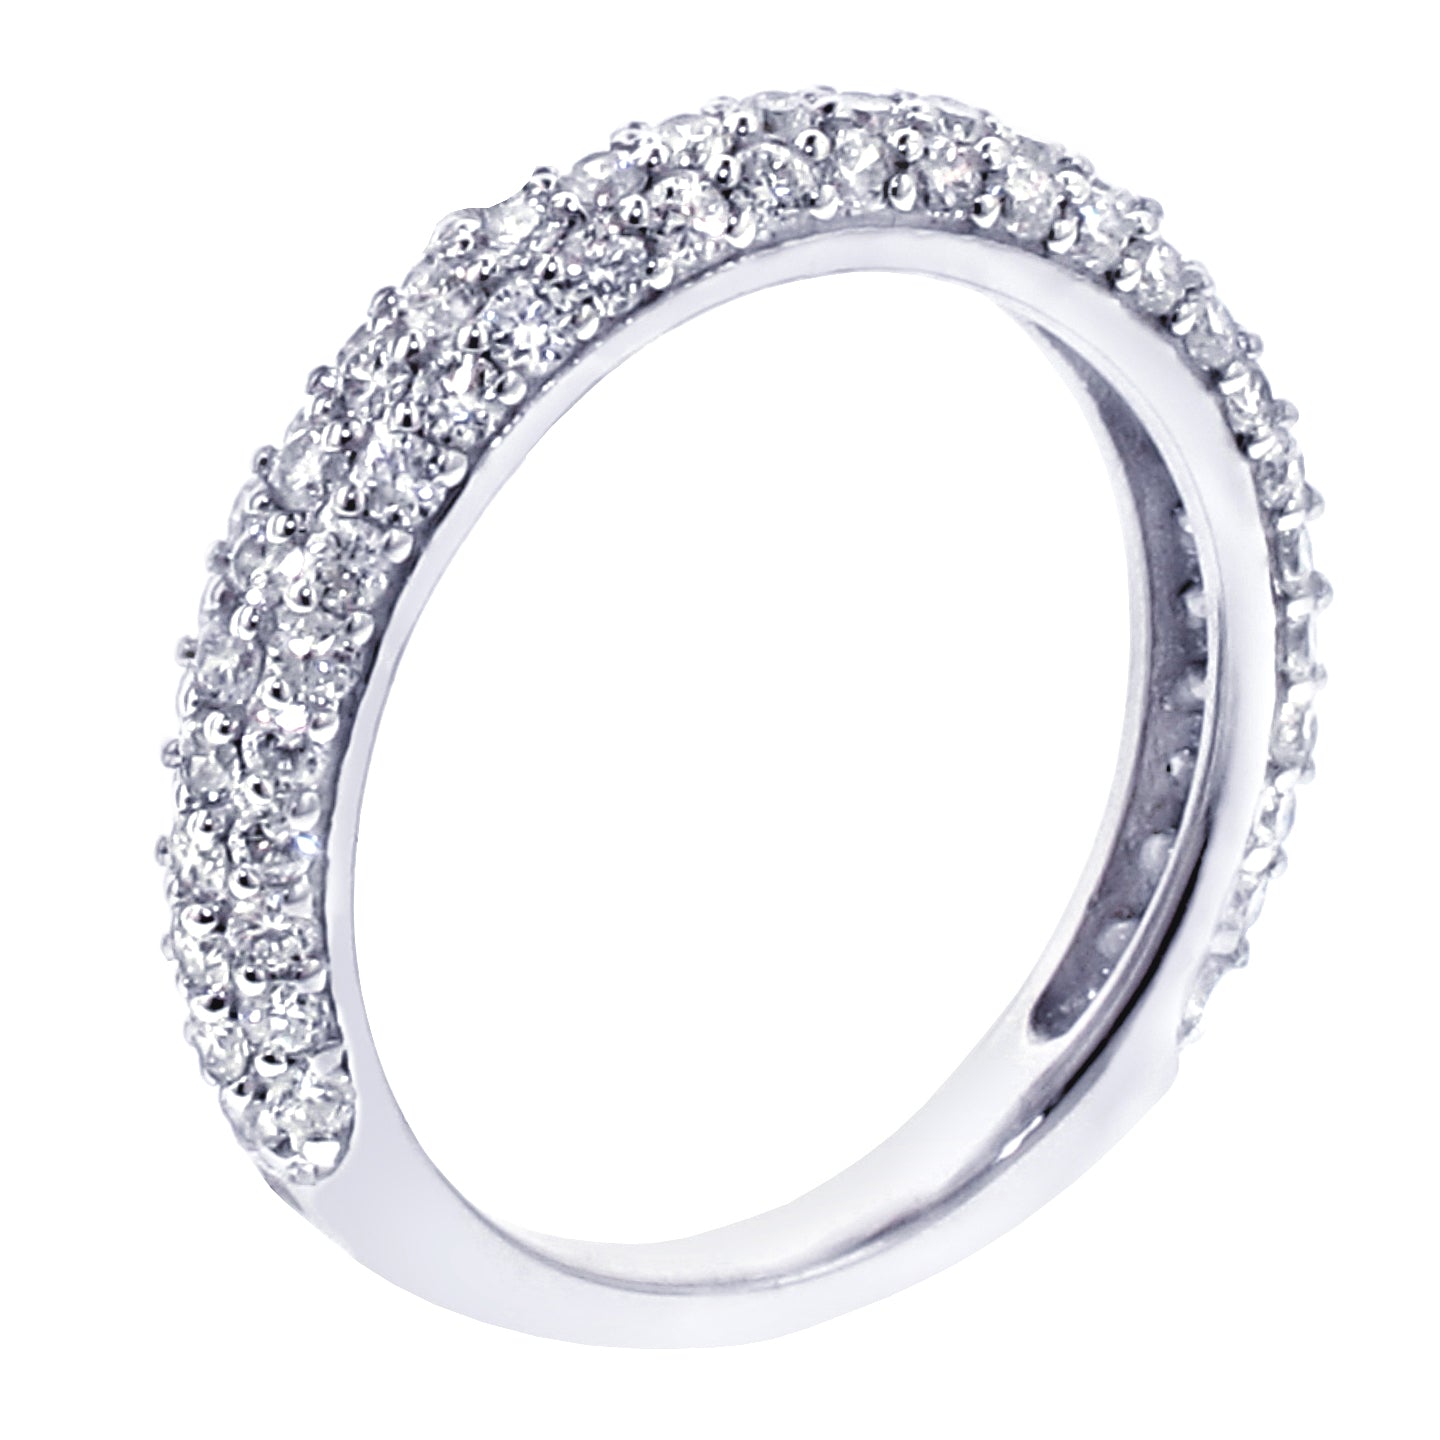 1.00 CT Pave Set Diamond Encrusted Anniversary Wedding Band in 14k White Gold